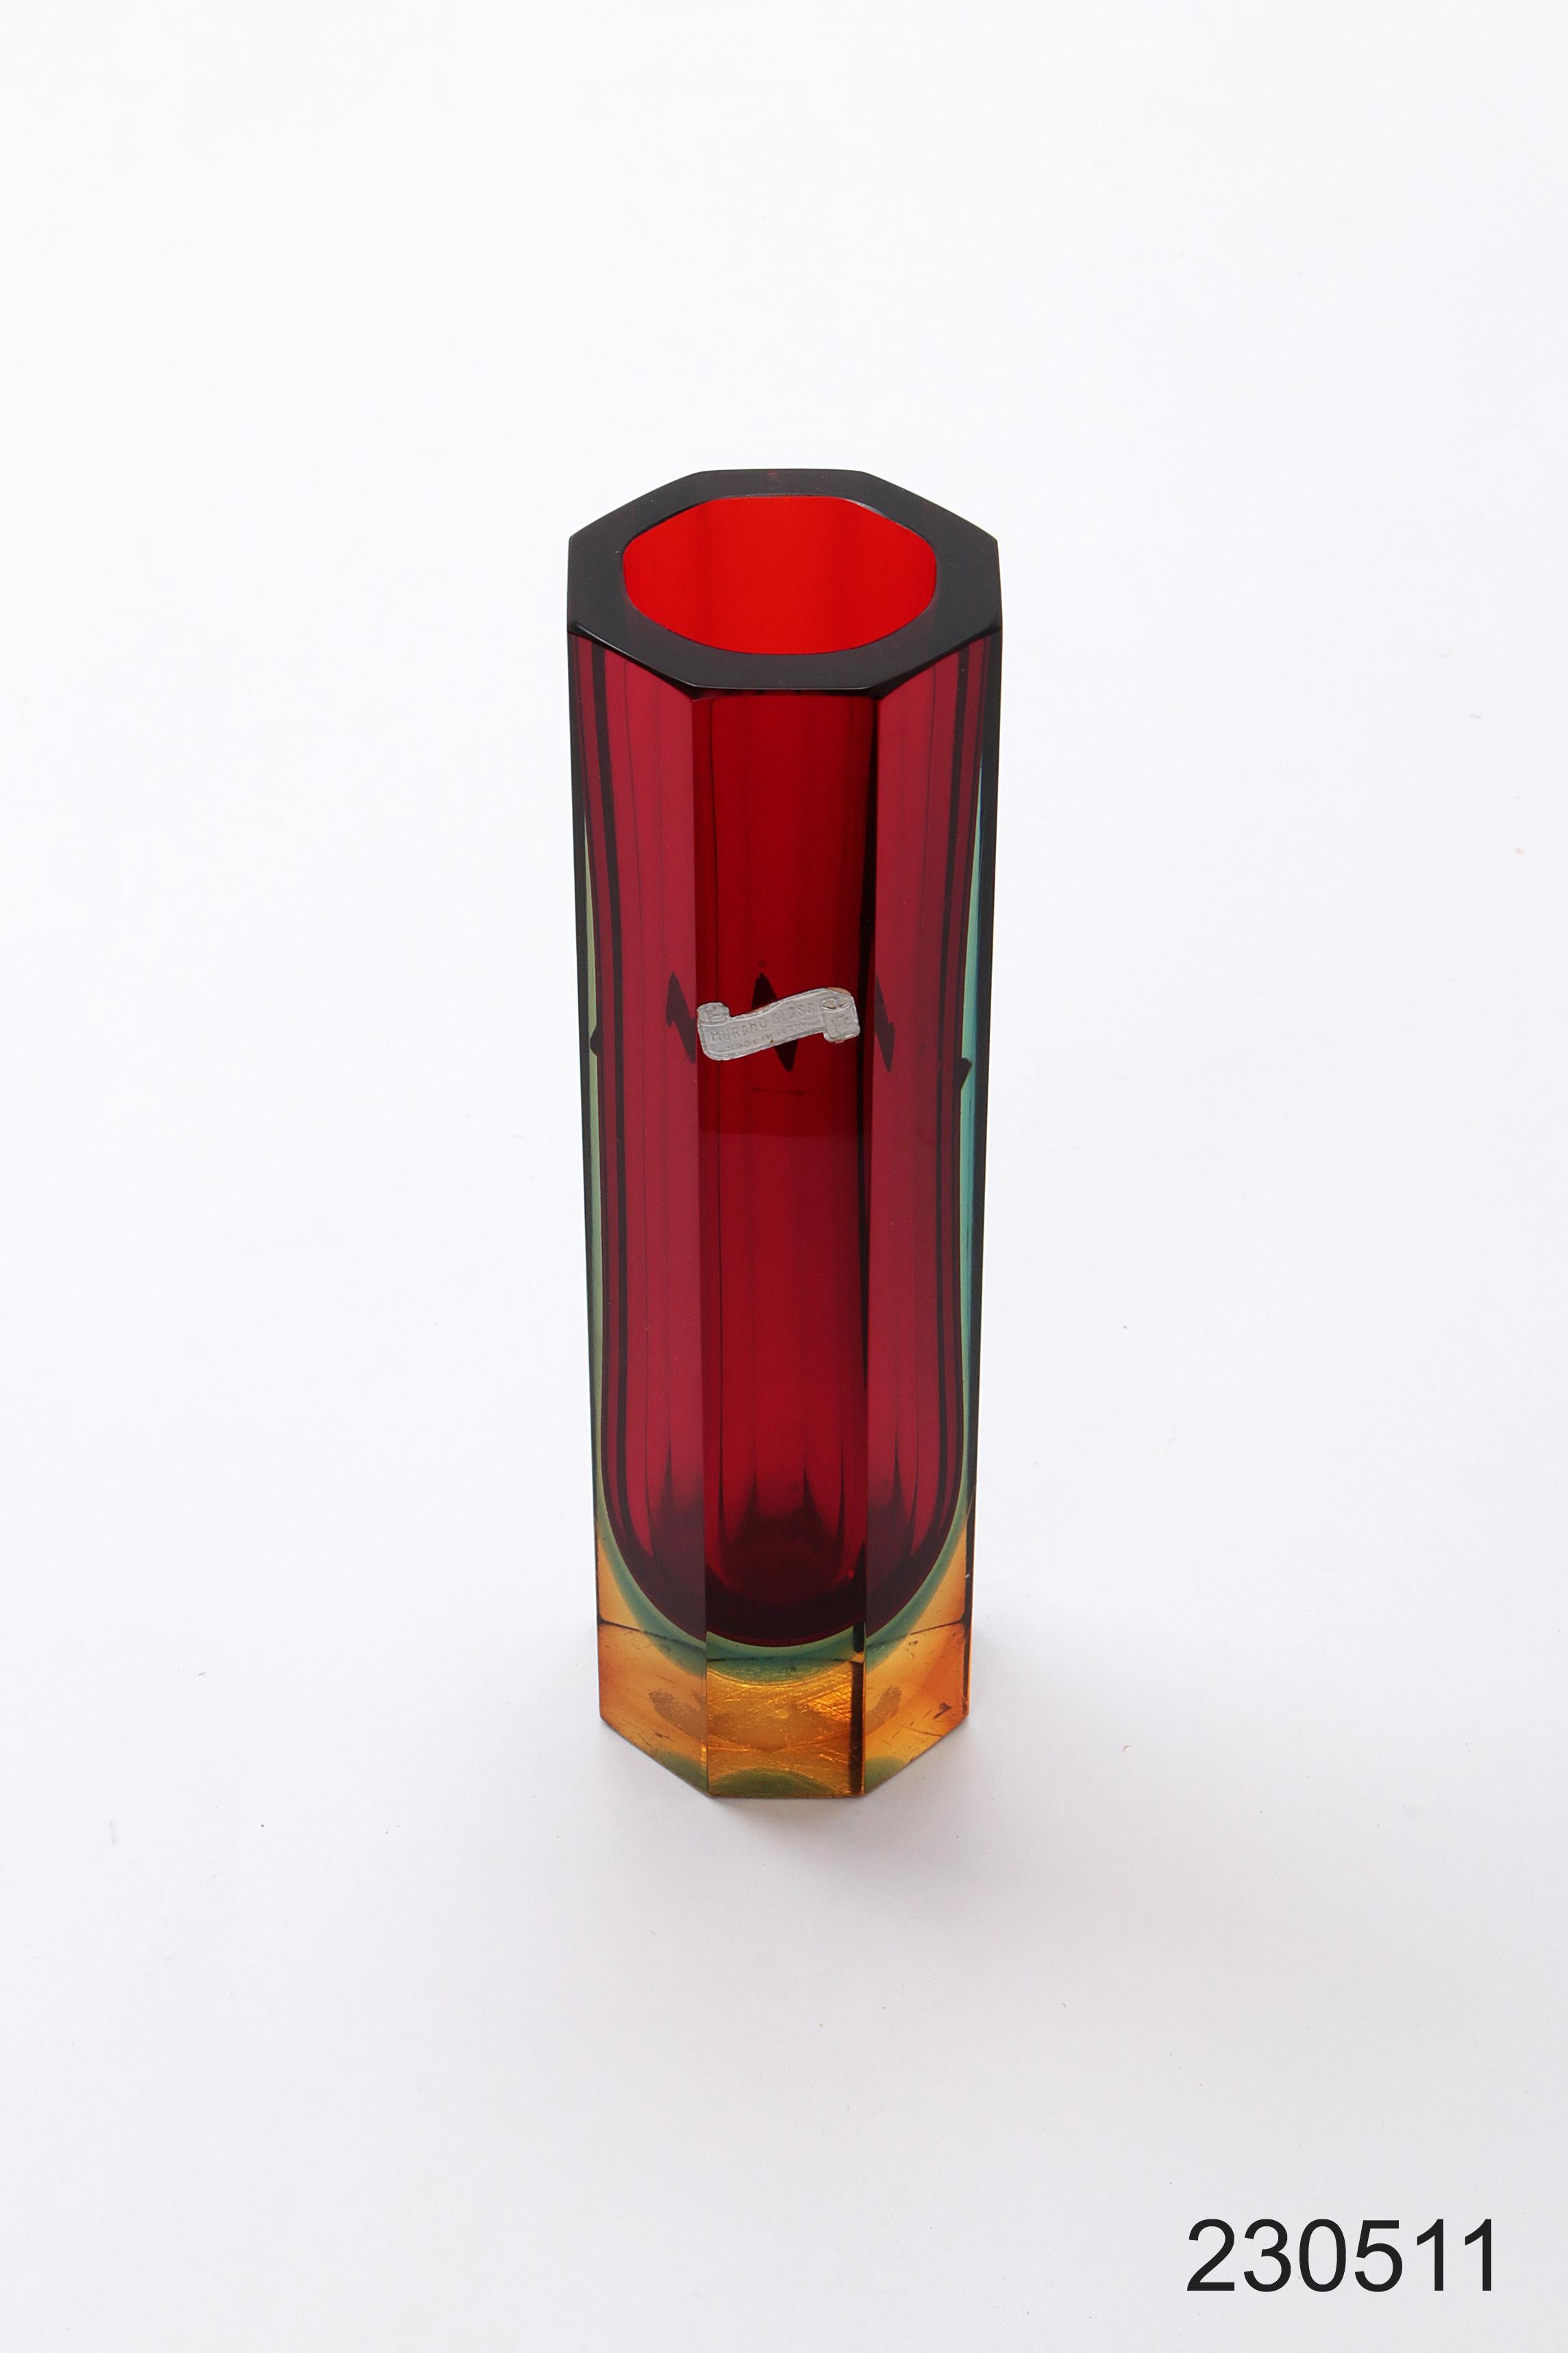 Murano Square Vase 8-sided Red/Green/Blue/Yellow

Murano block vase, 8-sided, is predominantly red with green, blue and yellow.

This vase is in pristine condition, made by Crystal Glass master Flavio Poli.


Vintage design vase Murano square block